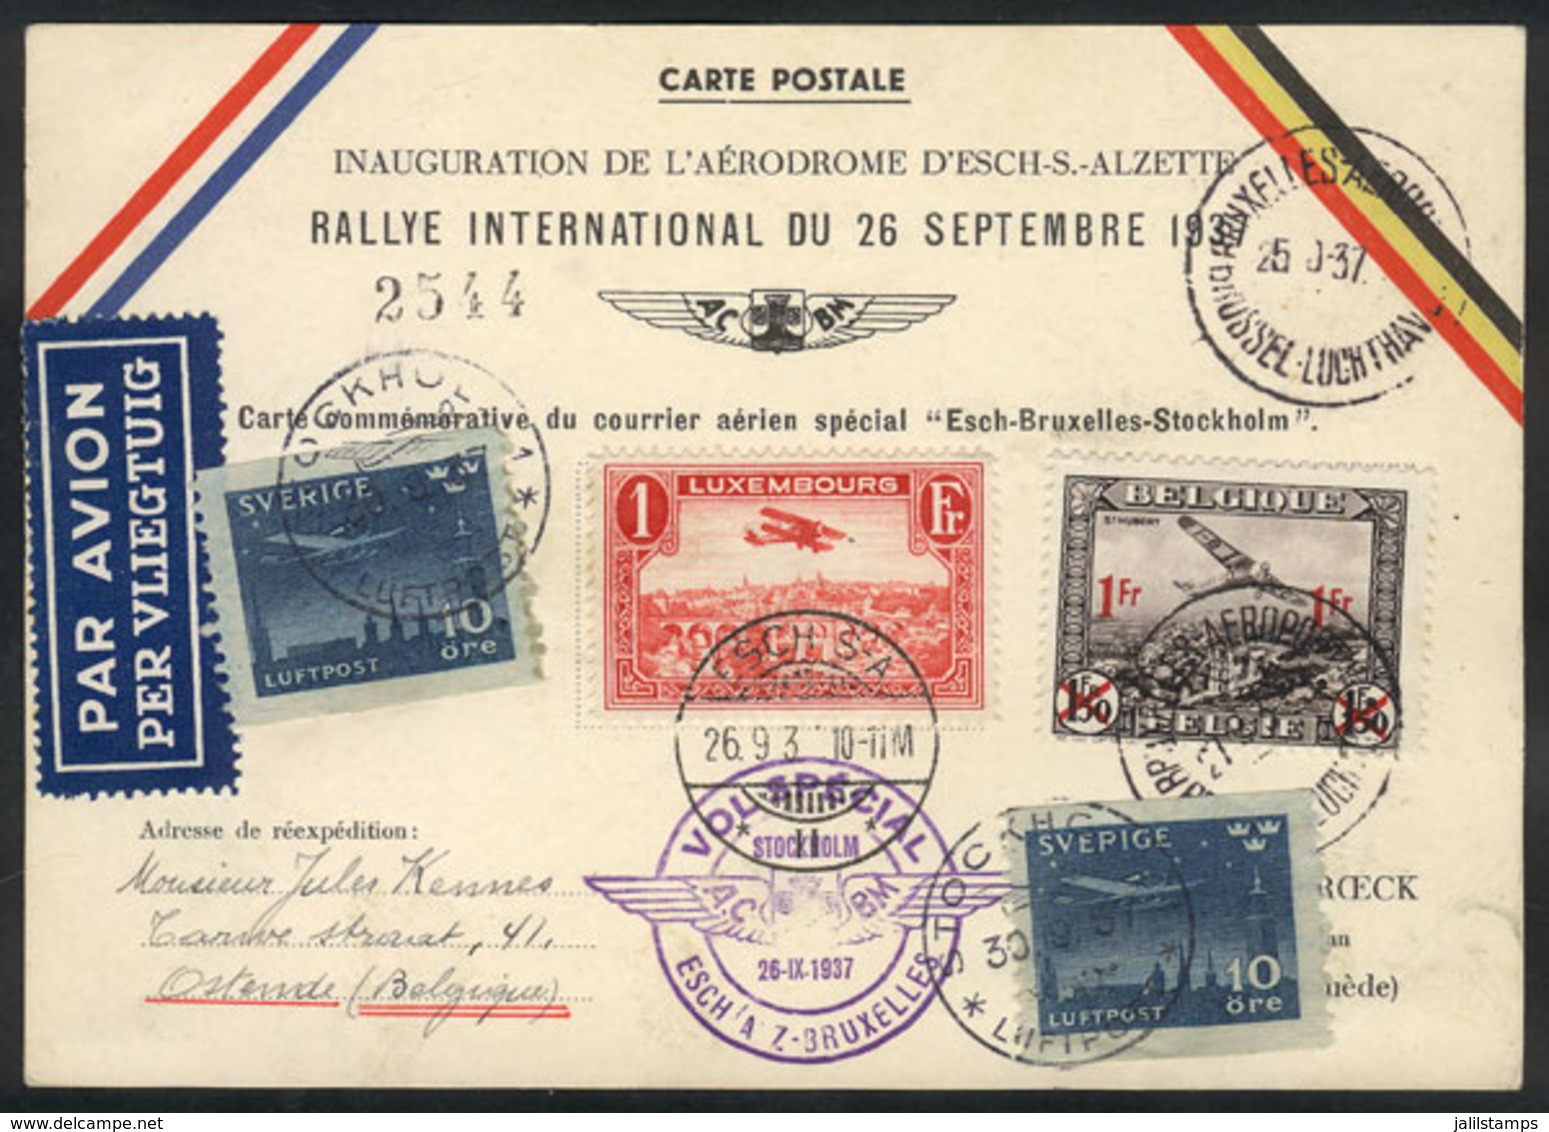 LUXEMBOURG: 26/SEP/1937 Aviation Rally, Inauguration Of The Airport Of Esch-Alzette, And Special Flight To Bruxelles, Ca - Briefe U. Dokumente